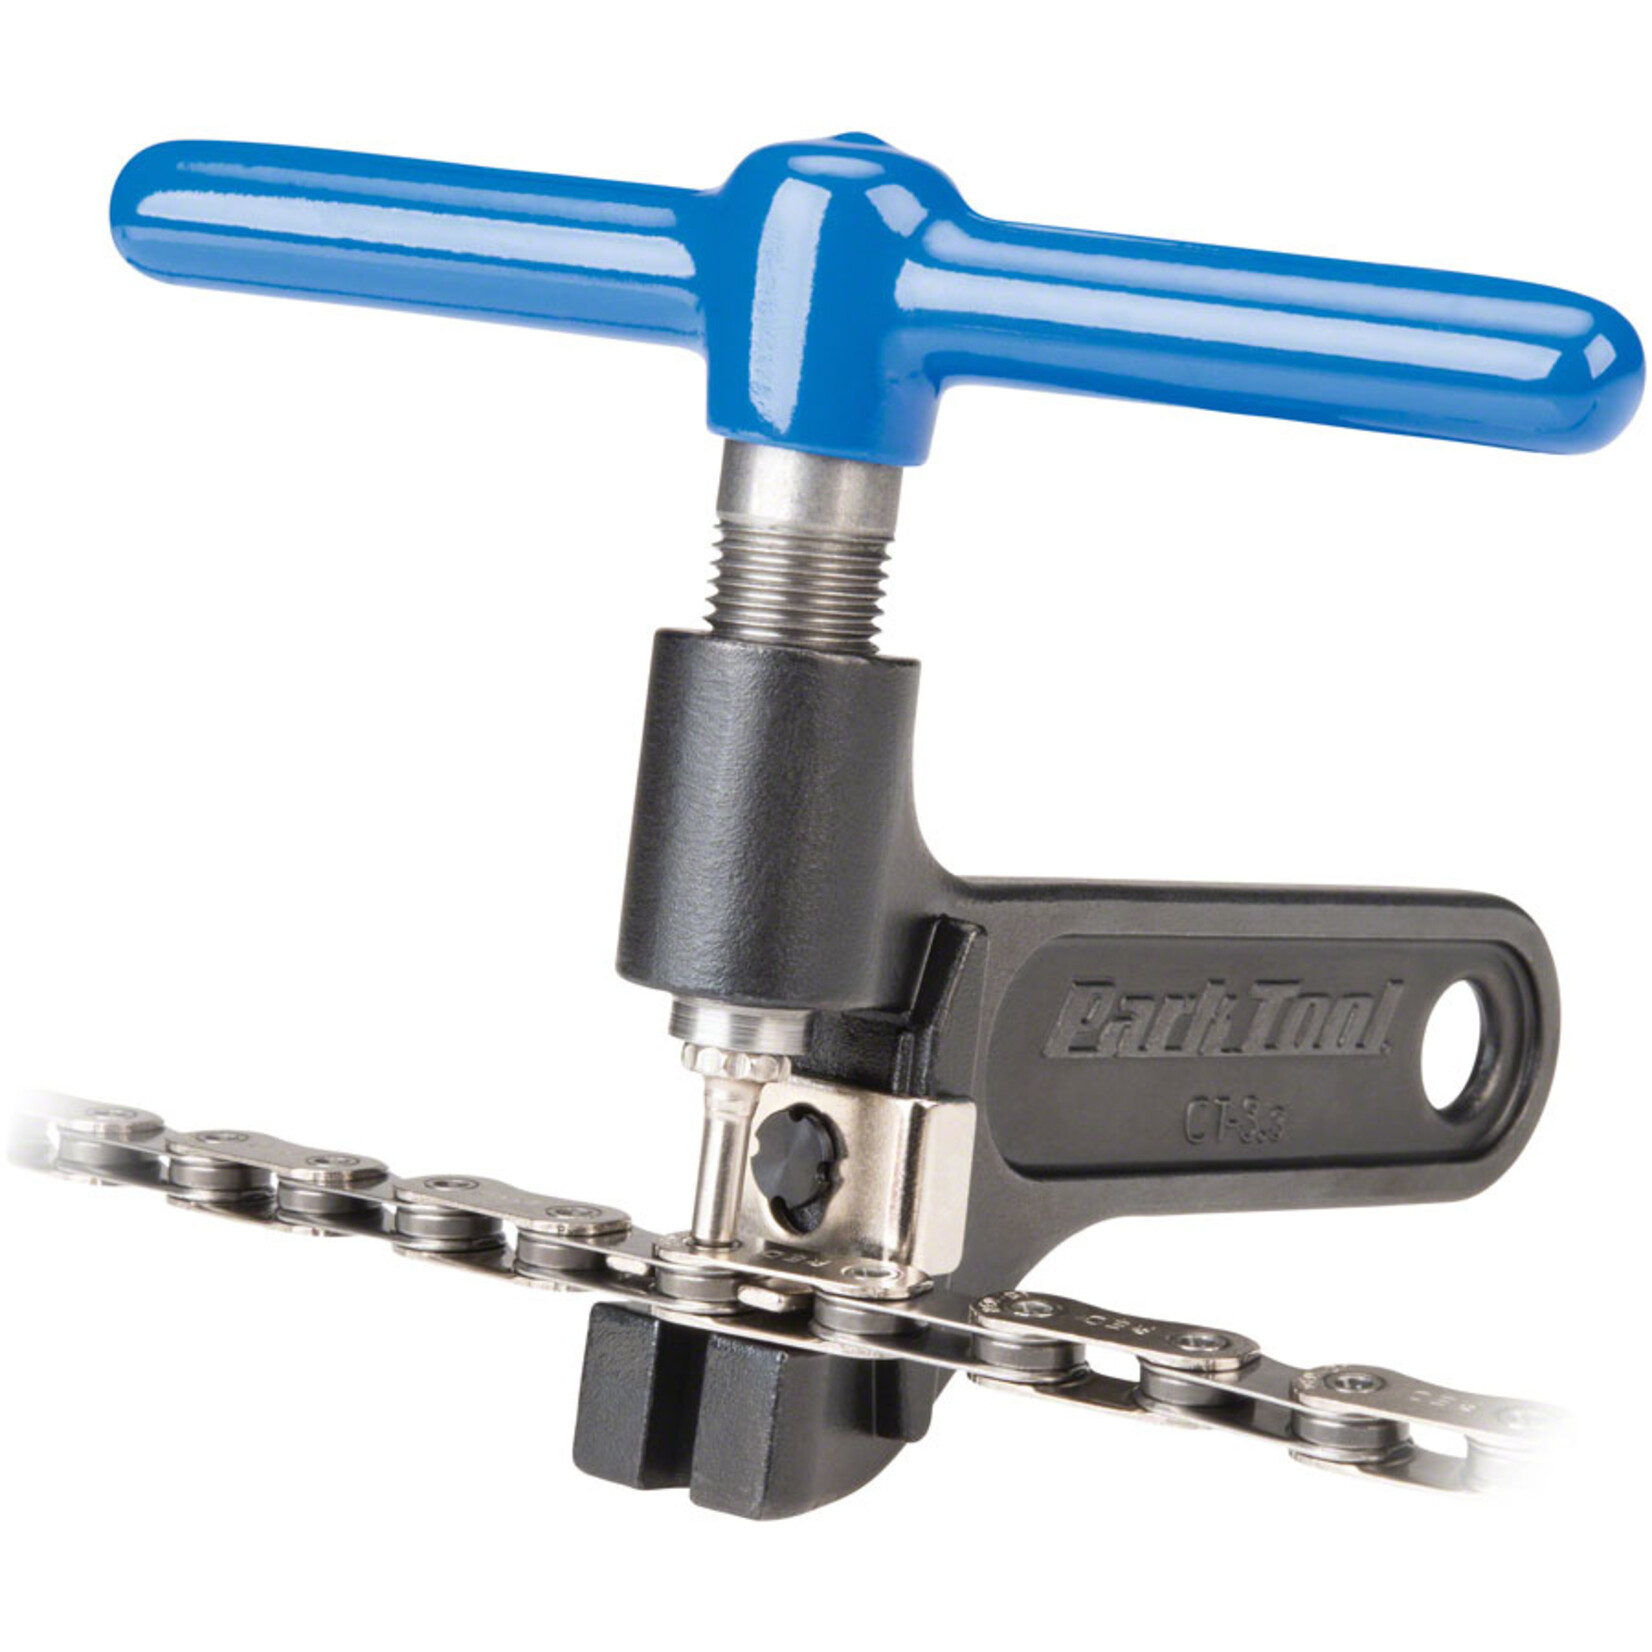 PARK TOOL Park Tool CT-3.3 5-12 Speed Chain Tool